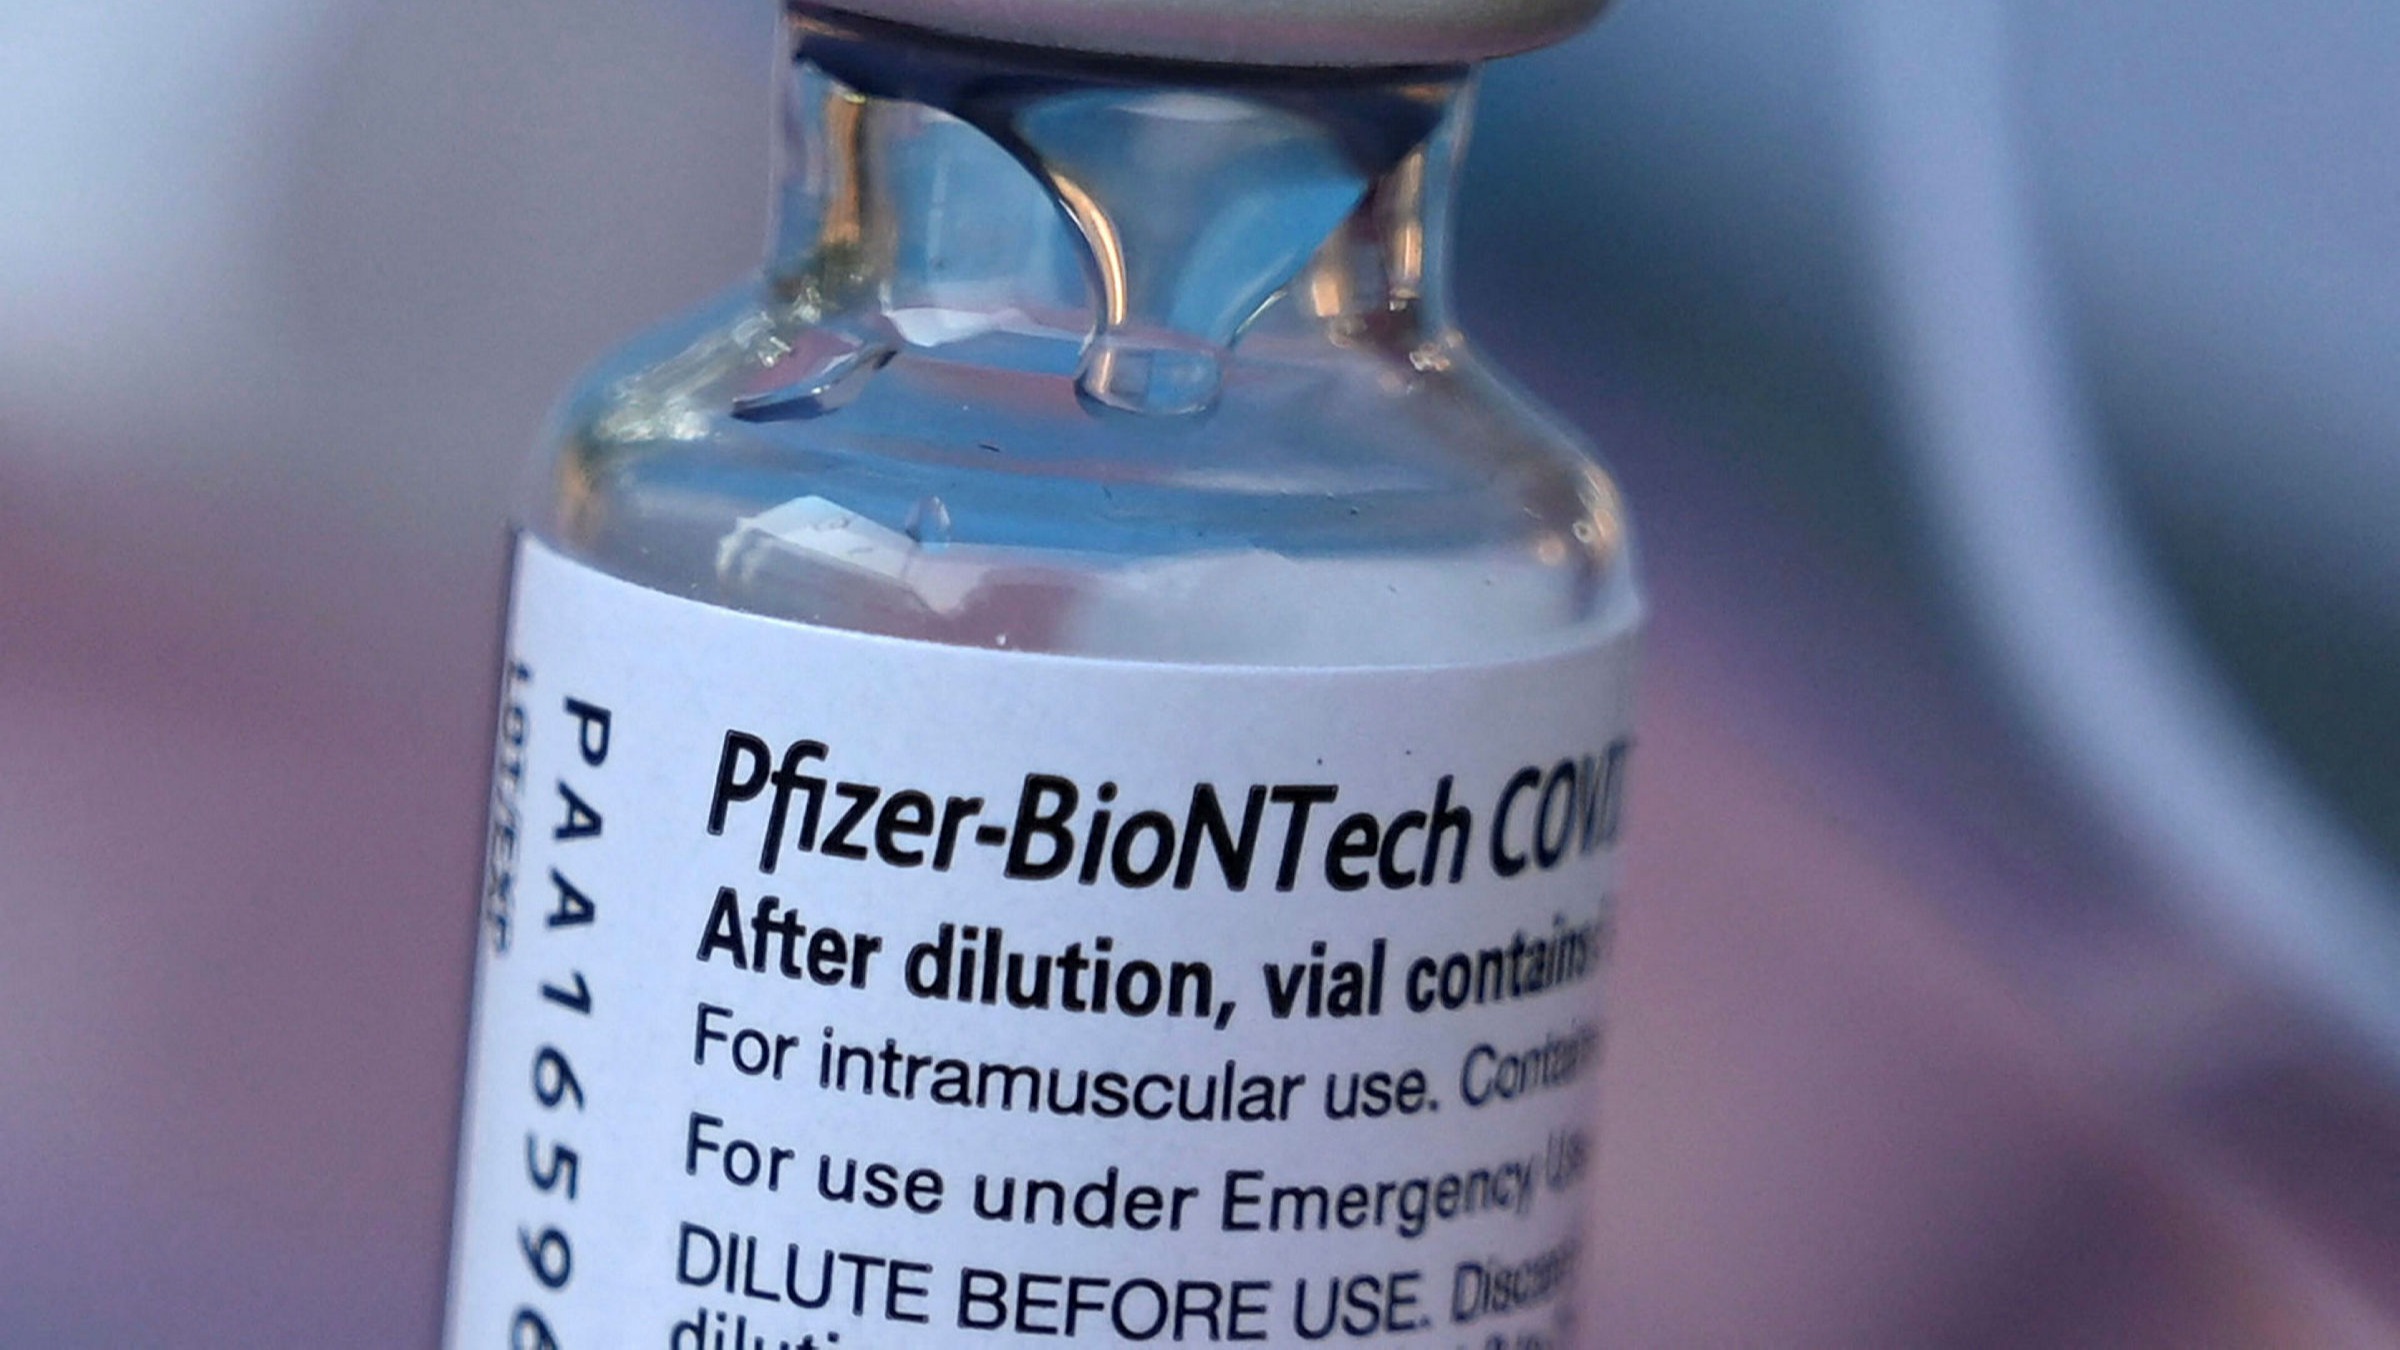 BioNTech to return almost €2bn to shareholders after Covid vaccine success  | Financial Times